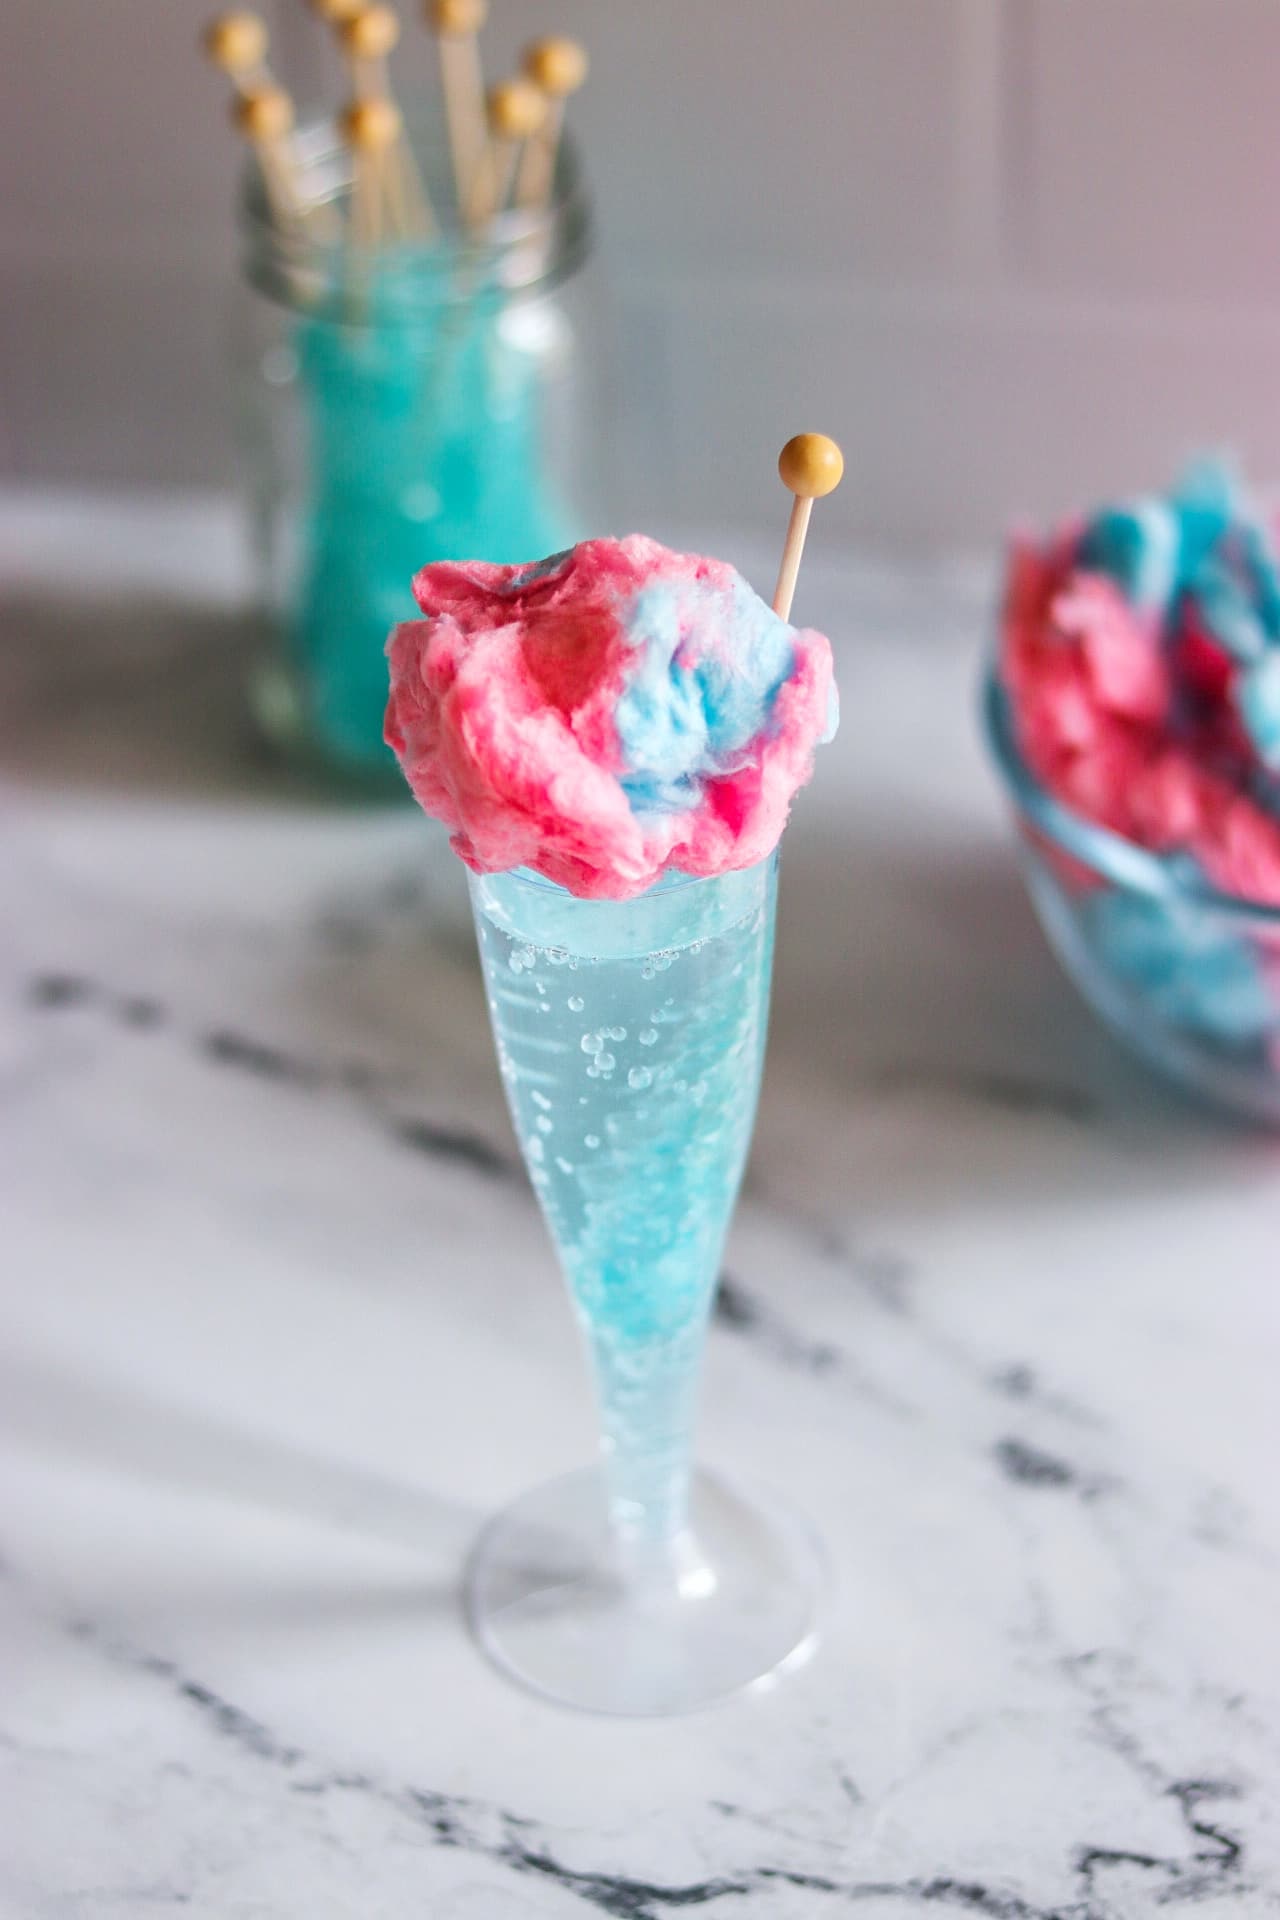 Non-alcoholic drinks for a New Year's Eve party: New Year's Rockin' Cotton Candy Mocktail